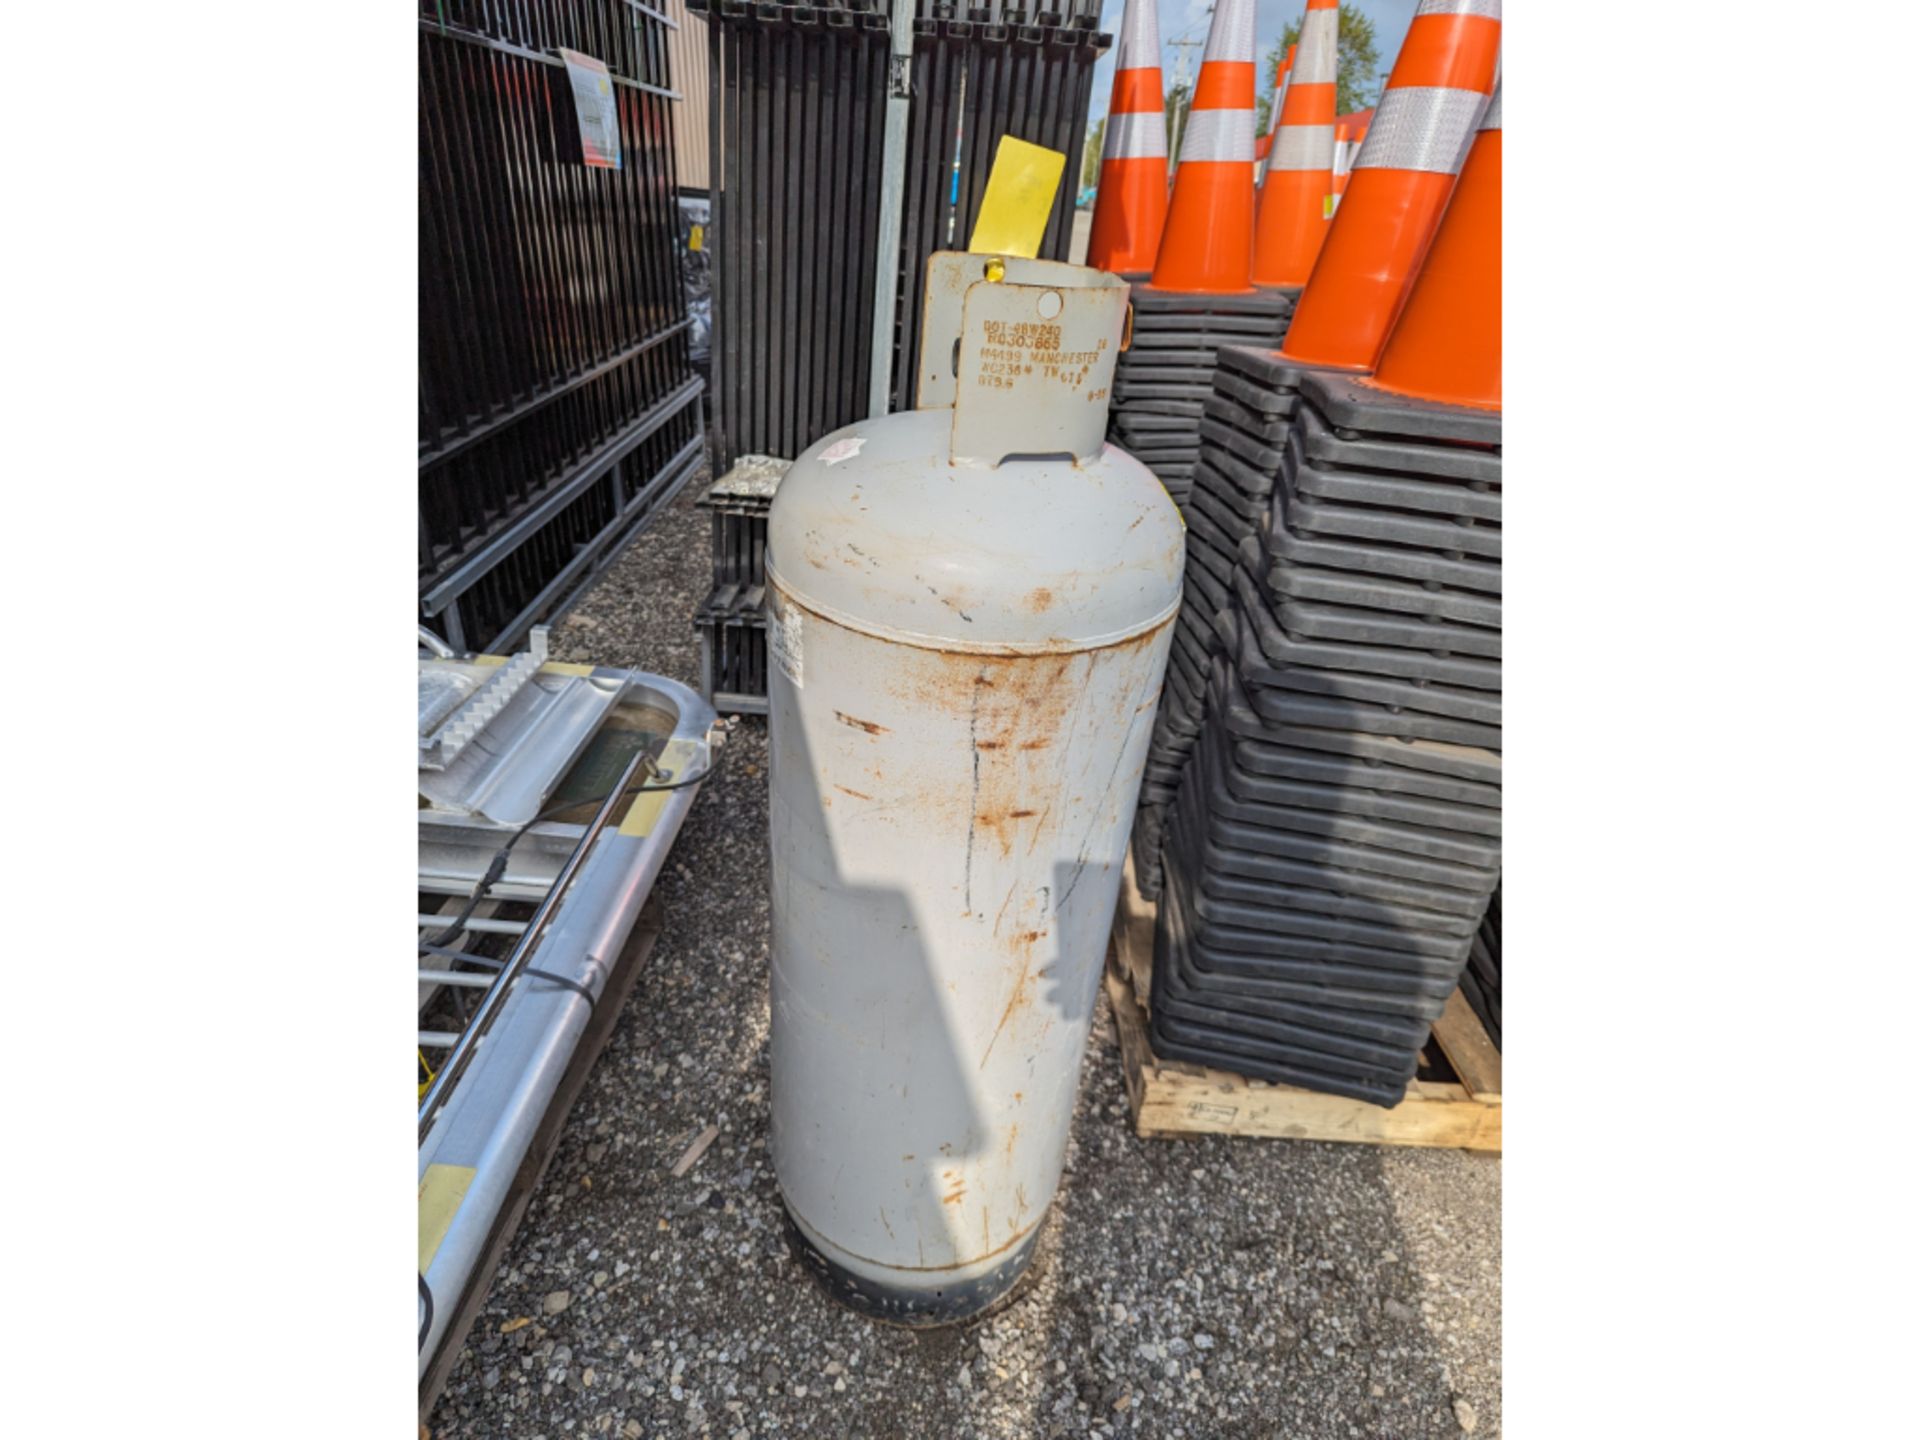 Compressed Air Tank S0teel Industrial Cylinder and Propane Tank LPG steel tank Cylinder - Image 2 of 3